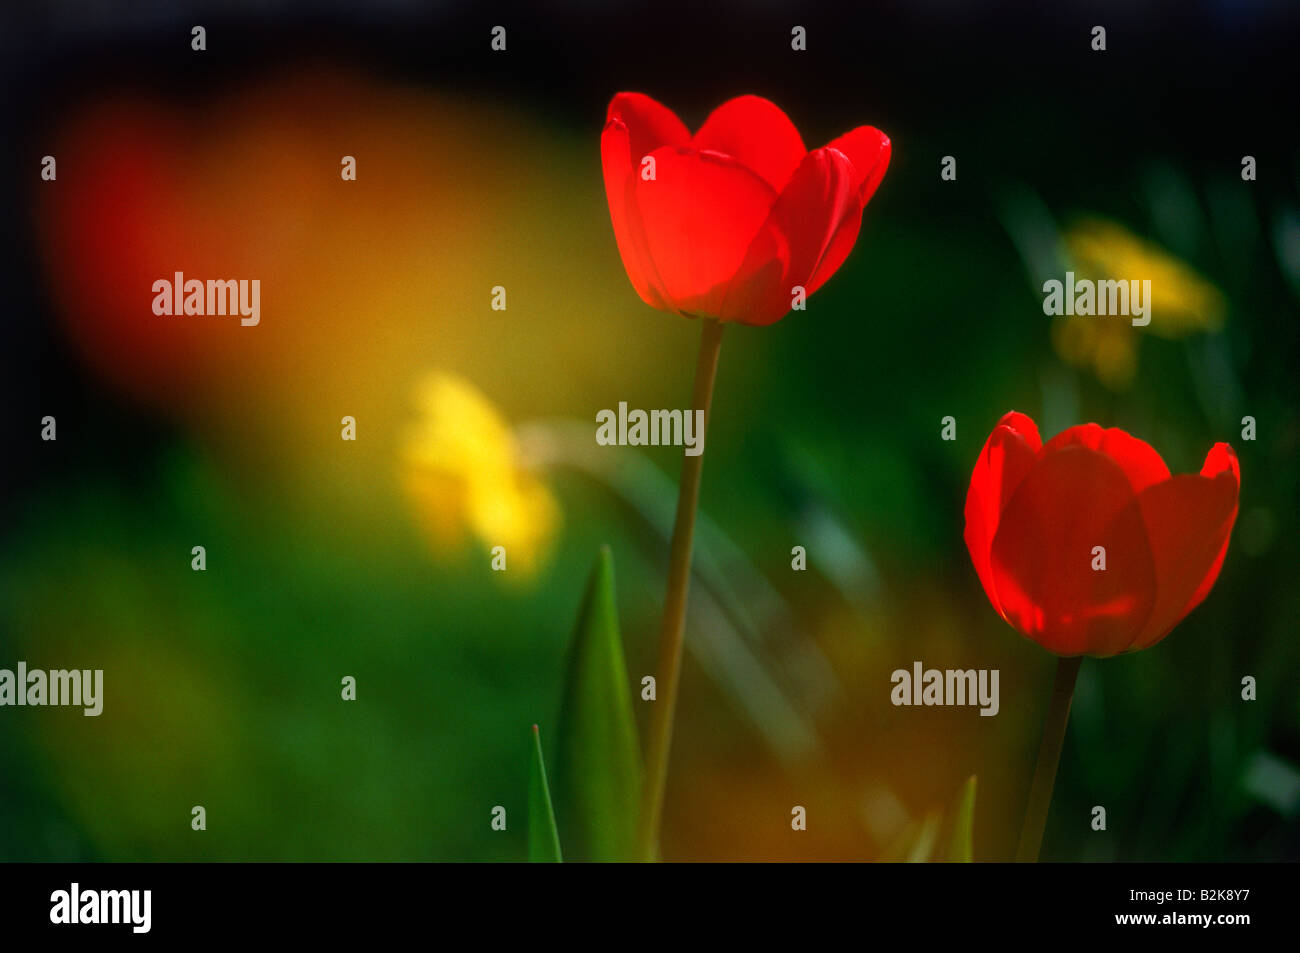 Red tulips in garden highlighted by sunlight Stock Photo